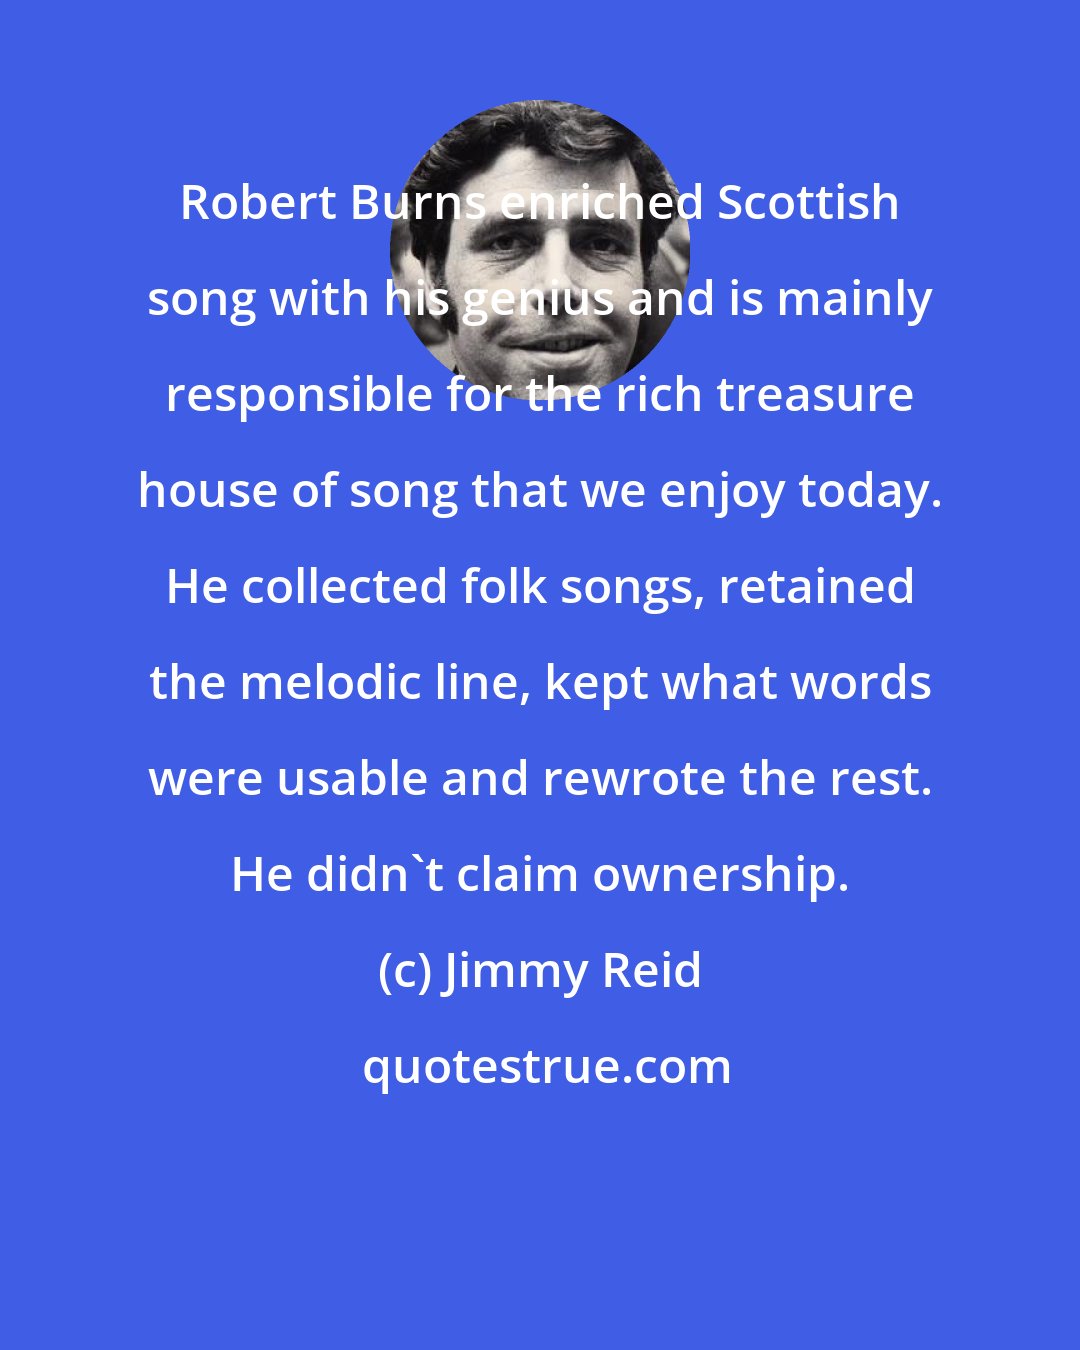 Jimmy Reid: Robert Burns enriched Scottish song with his genius and is mainly responsible for the rich treasure house of song that we enjoy today. He collected folk songs, retained the melodic line, kept what words were usable and rewrote the rest. He didn't claim ownership.